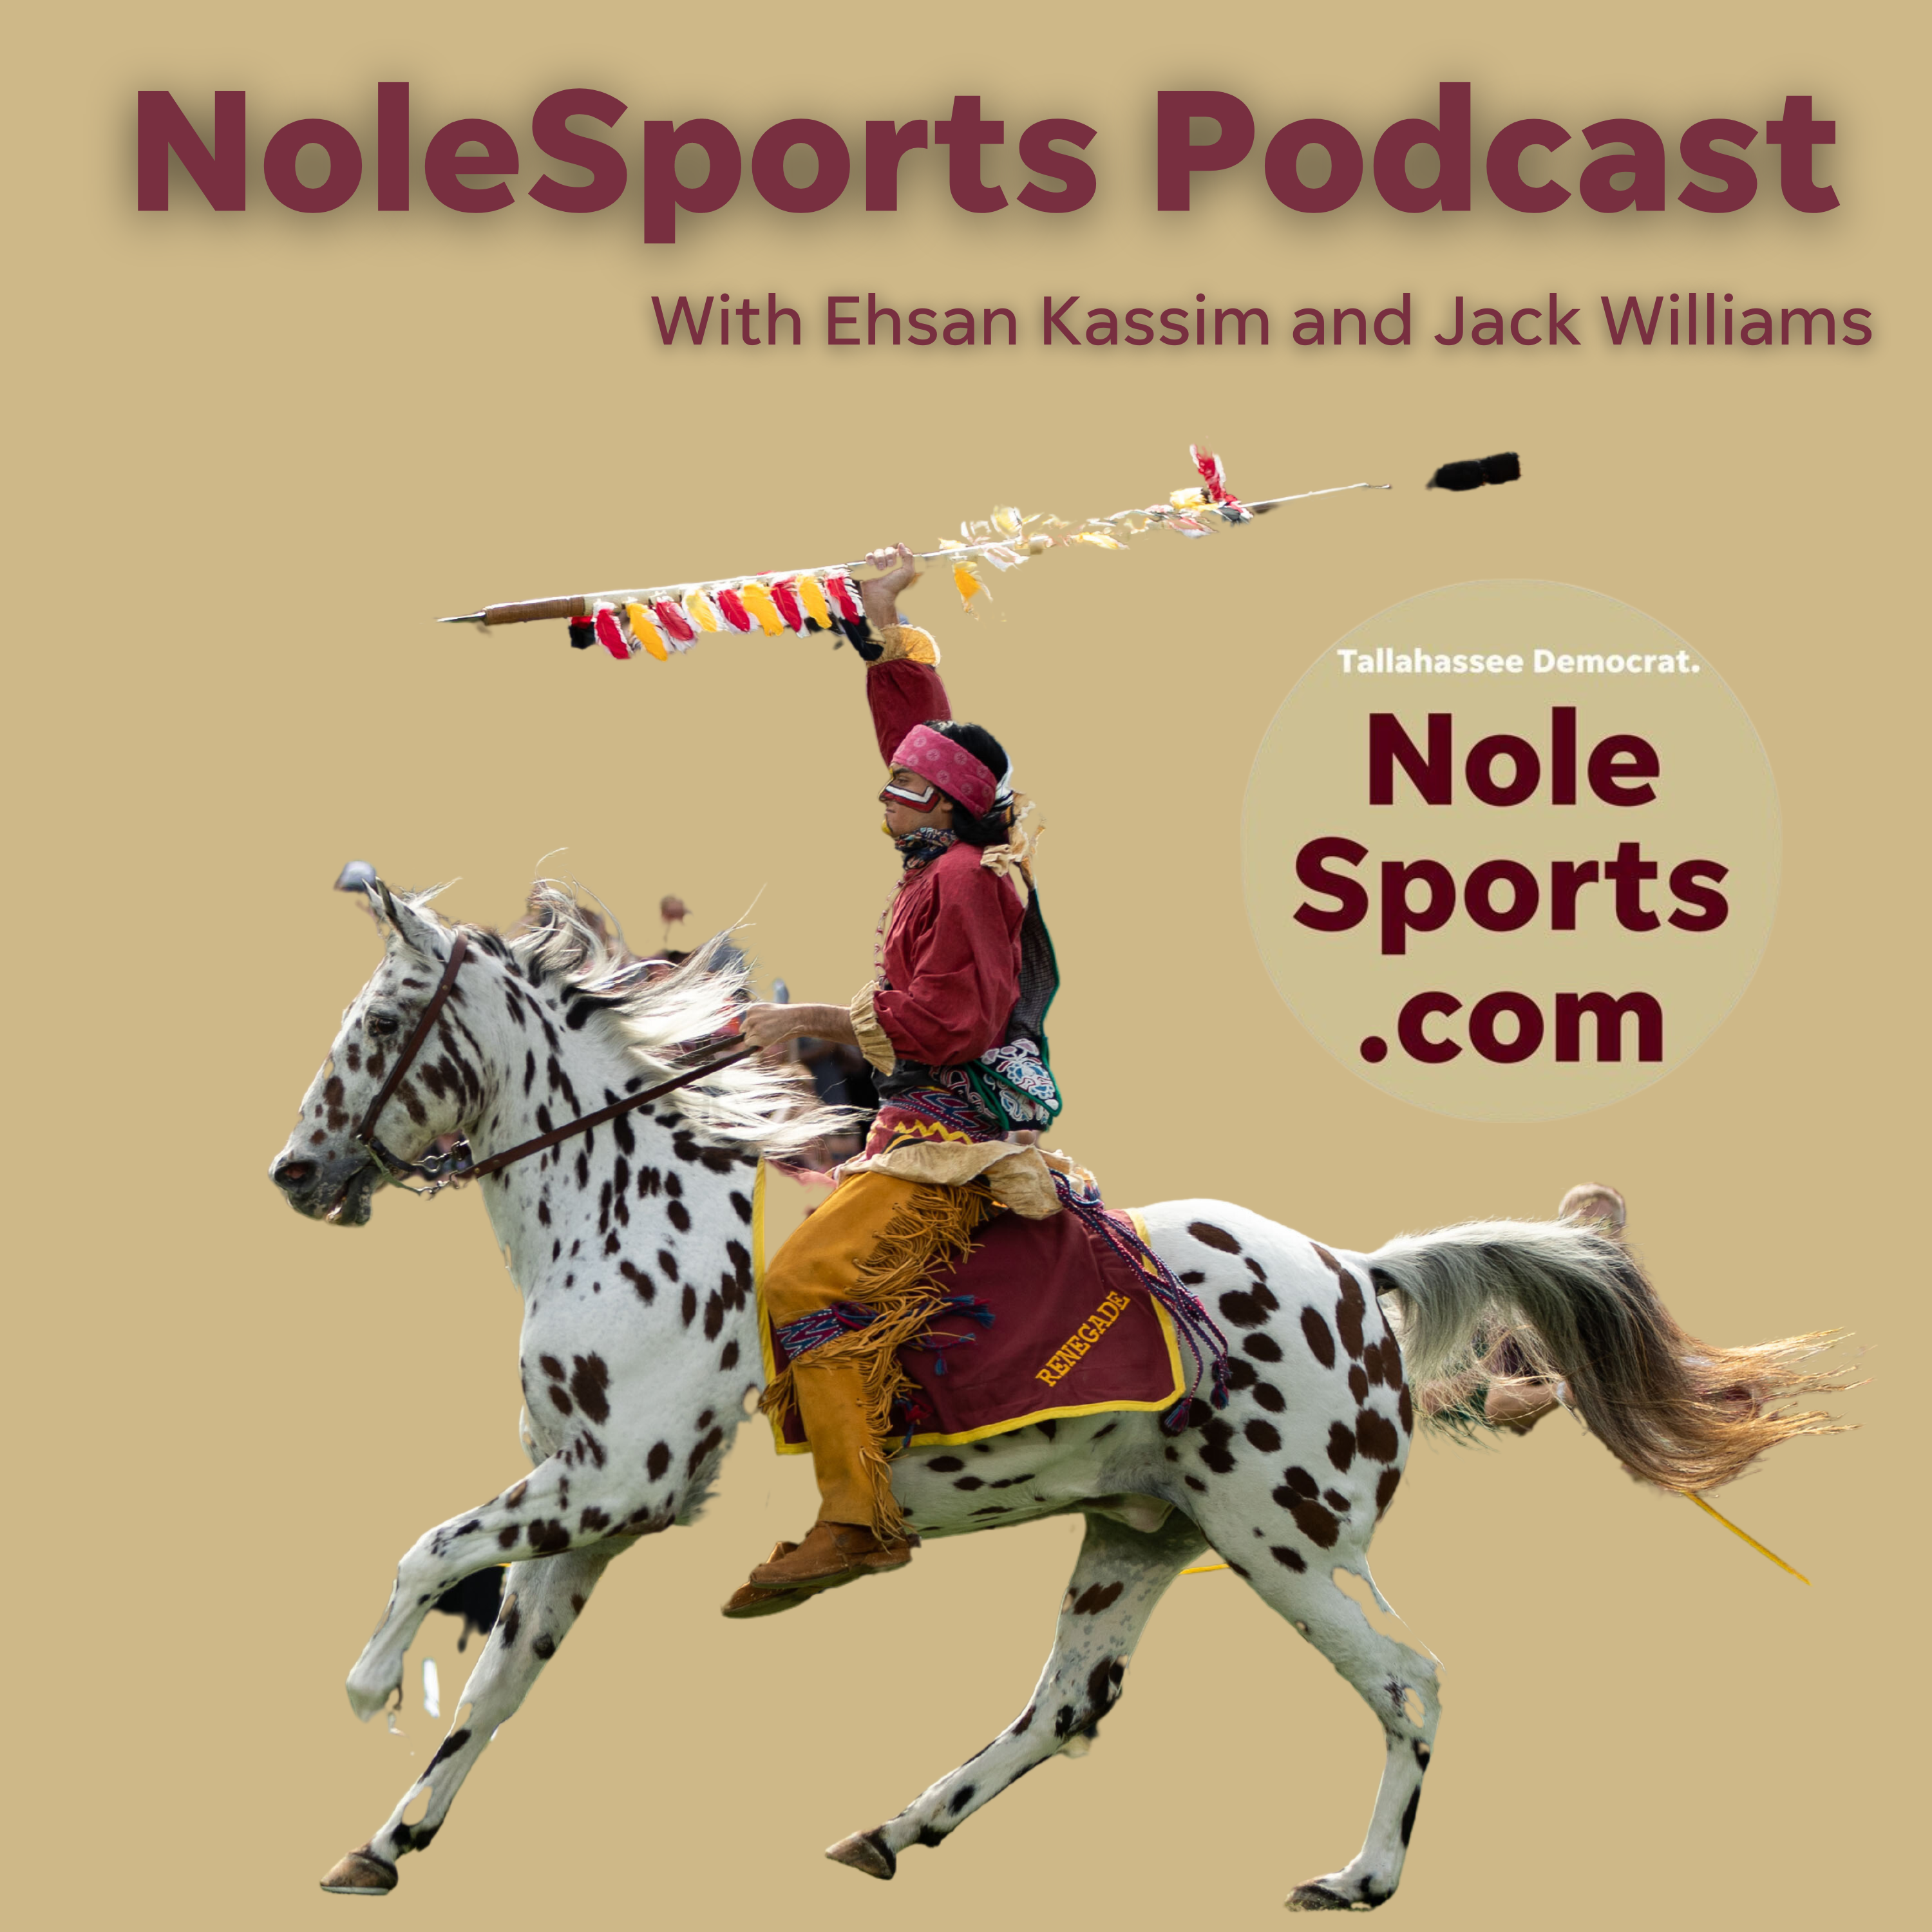 NoleSports Podcast - Previewing the Orange Bowl against Georgia